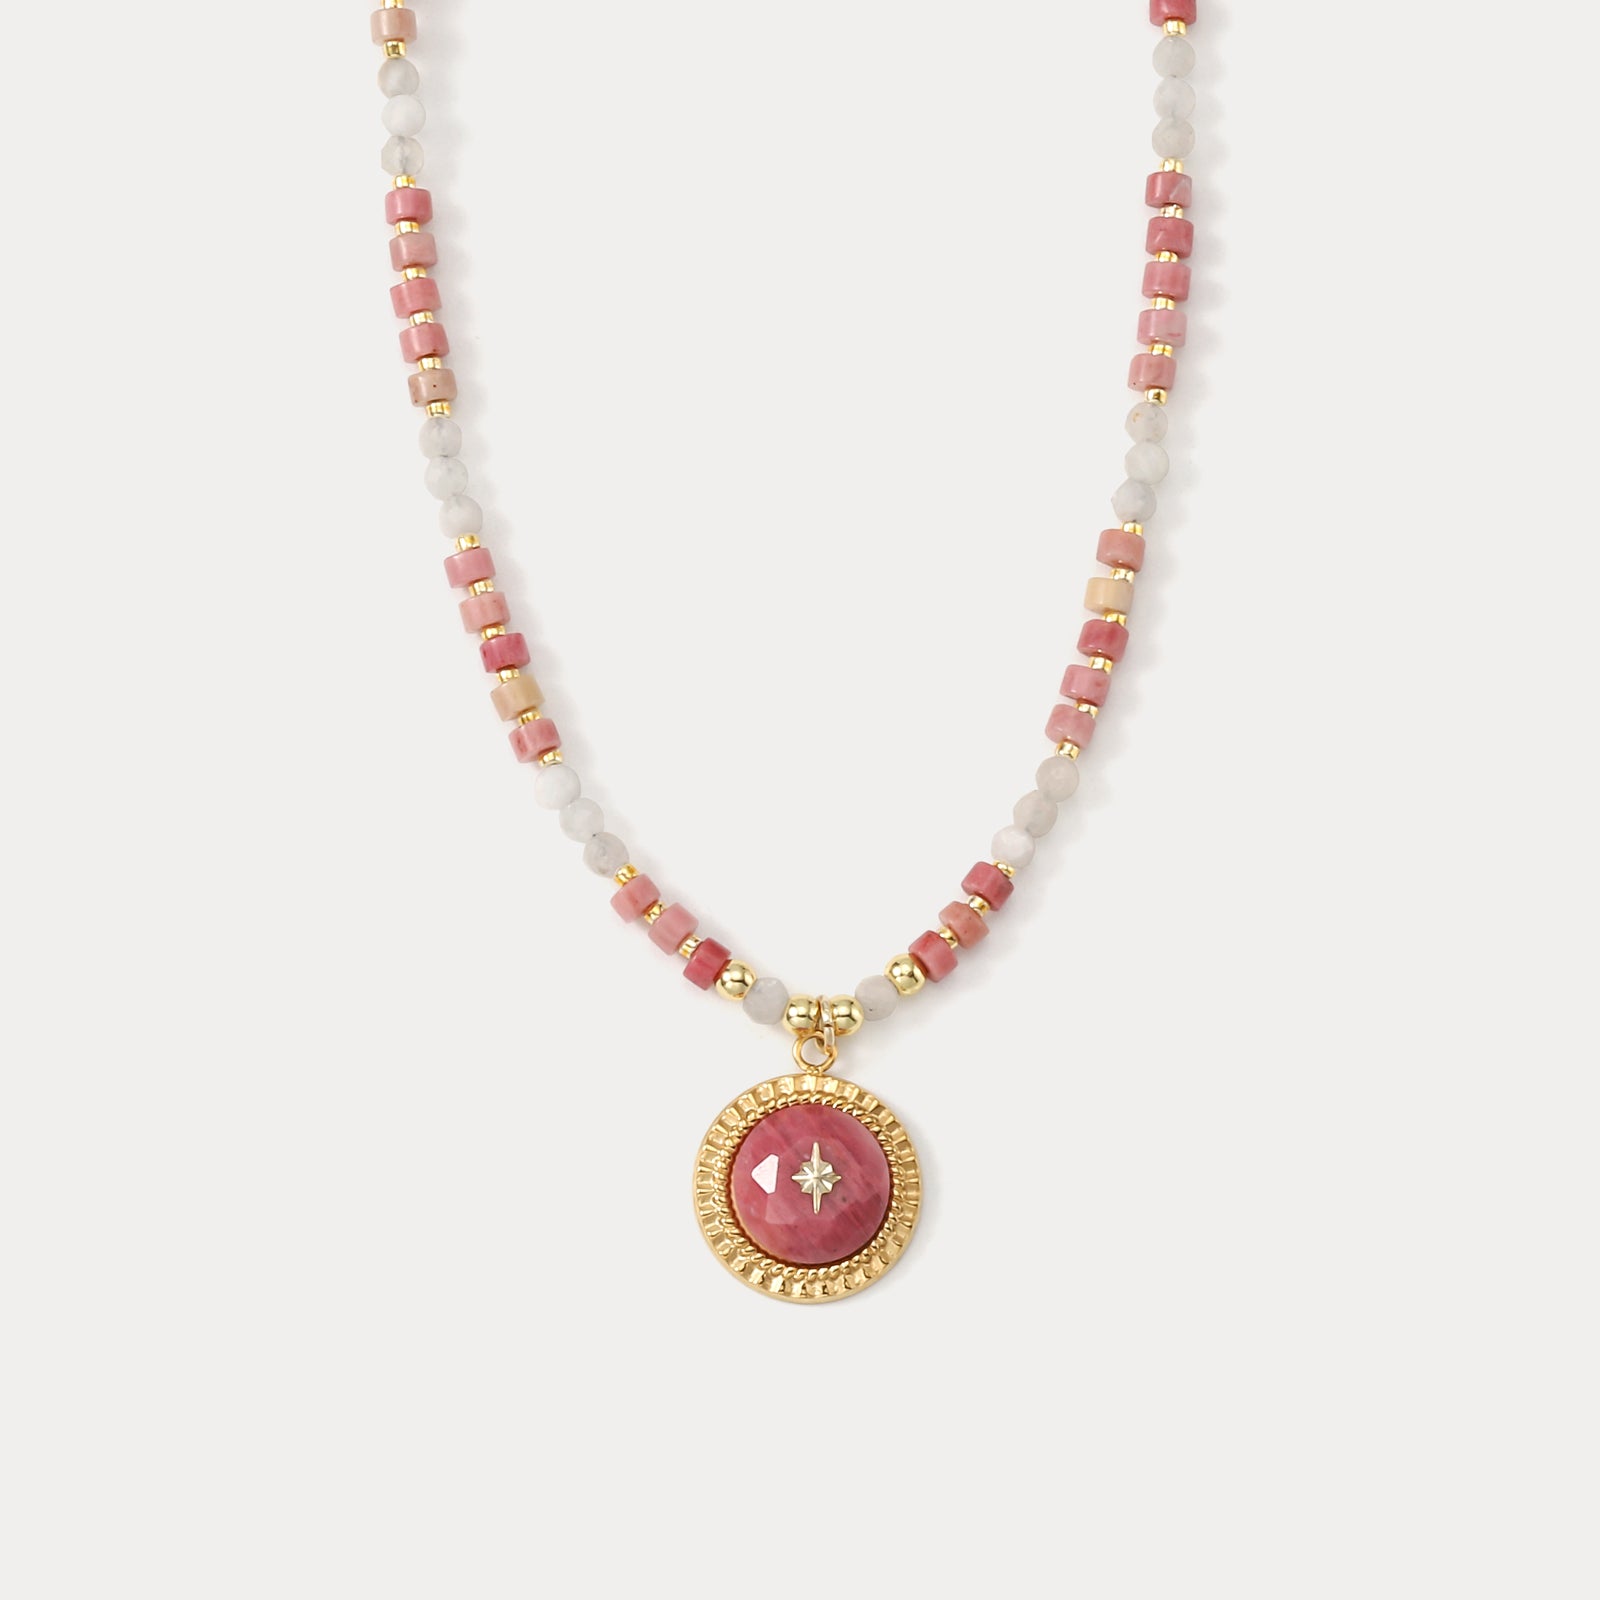 North Star Beaded Necklace